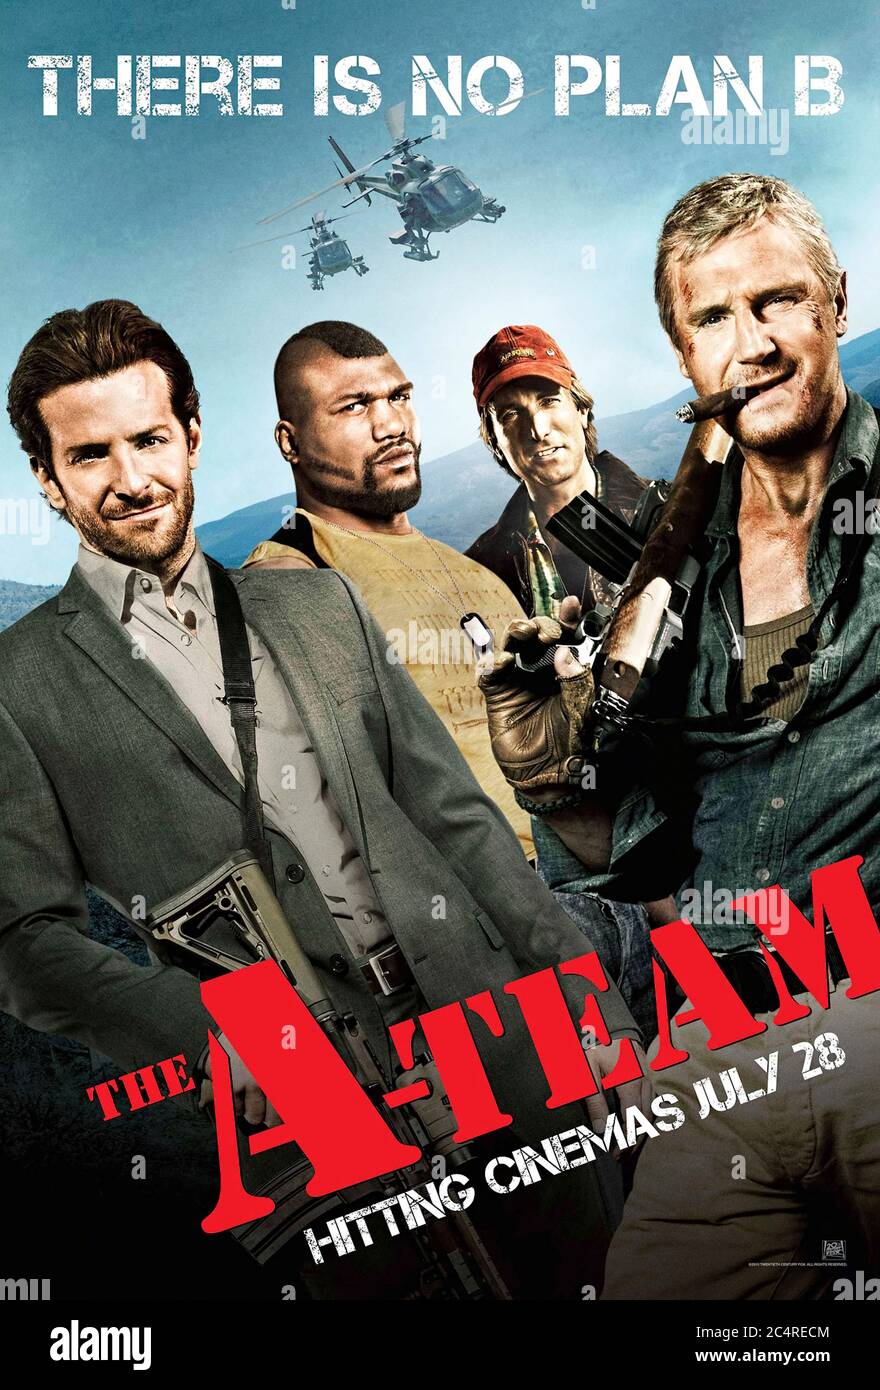 The A-Team (2010) directed by Joe Carnahan and starring Liam Neeson, Bradley Cooper, Sharlto Copley and Quinton 'Rampage' Jackson. Big screen reboot of the popular 1980s TV series, a group of veterans fight to clear their name after being framed for a crime they did not commit. Stock Photo